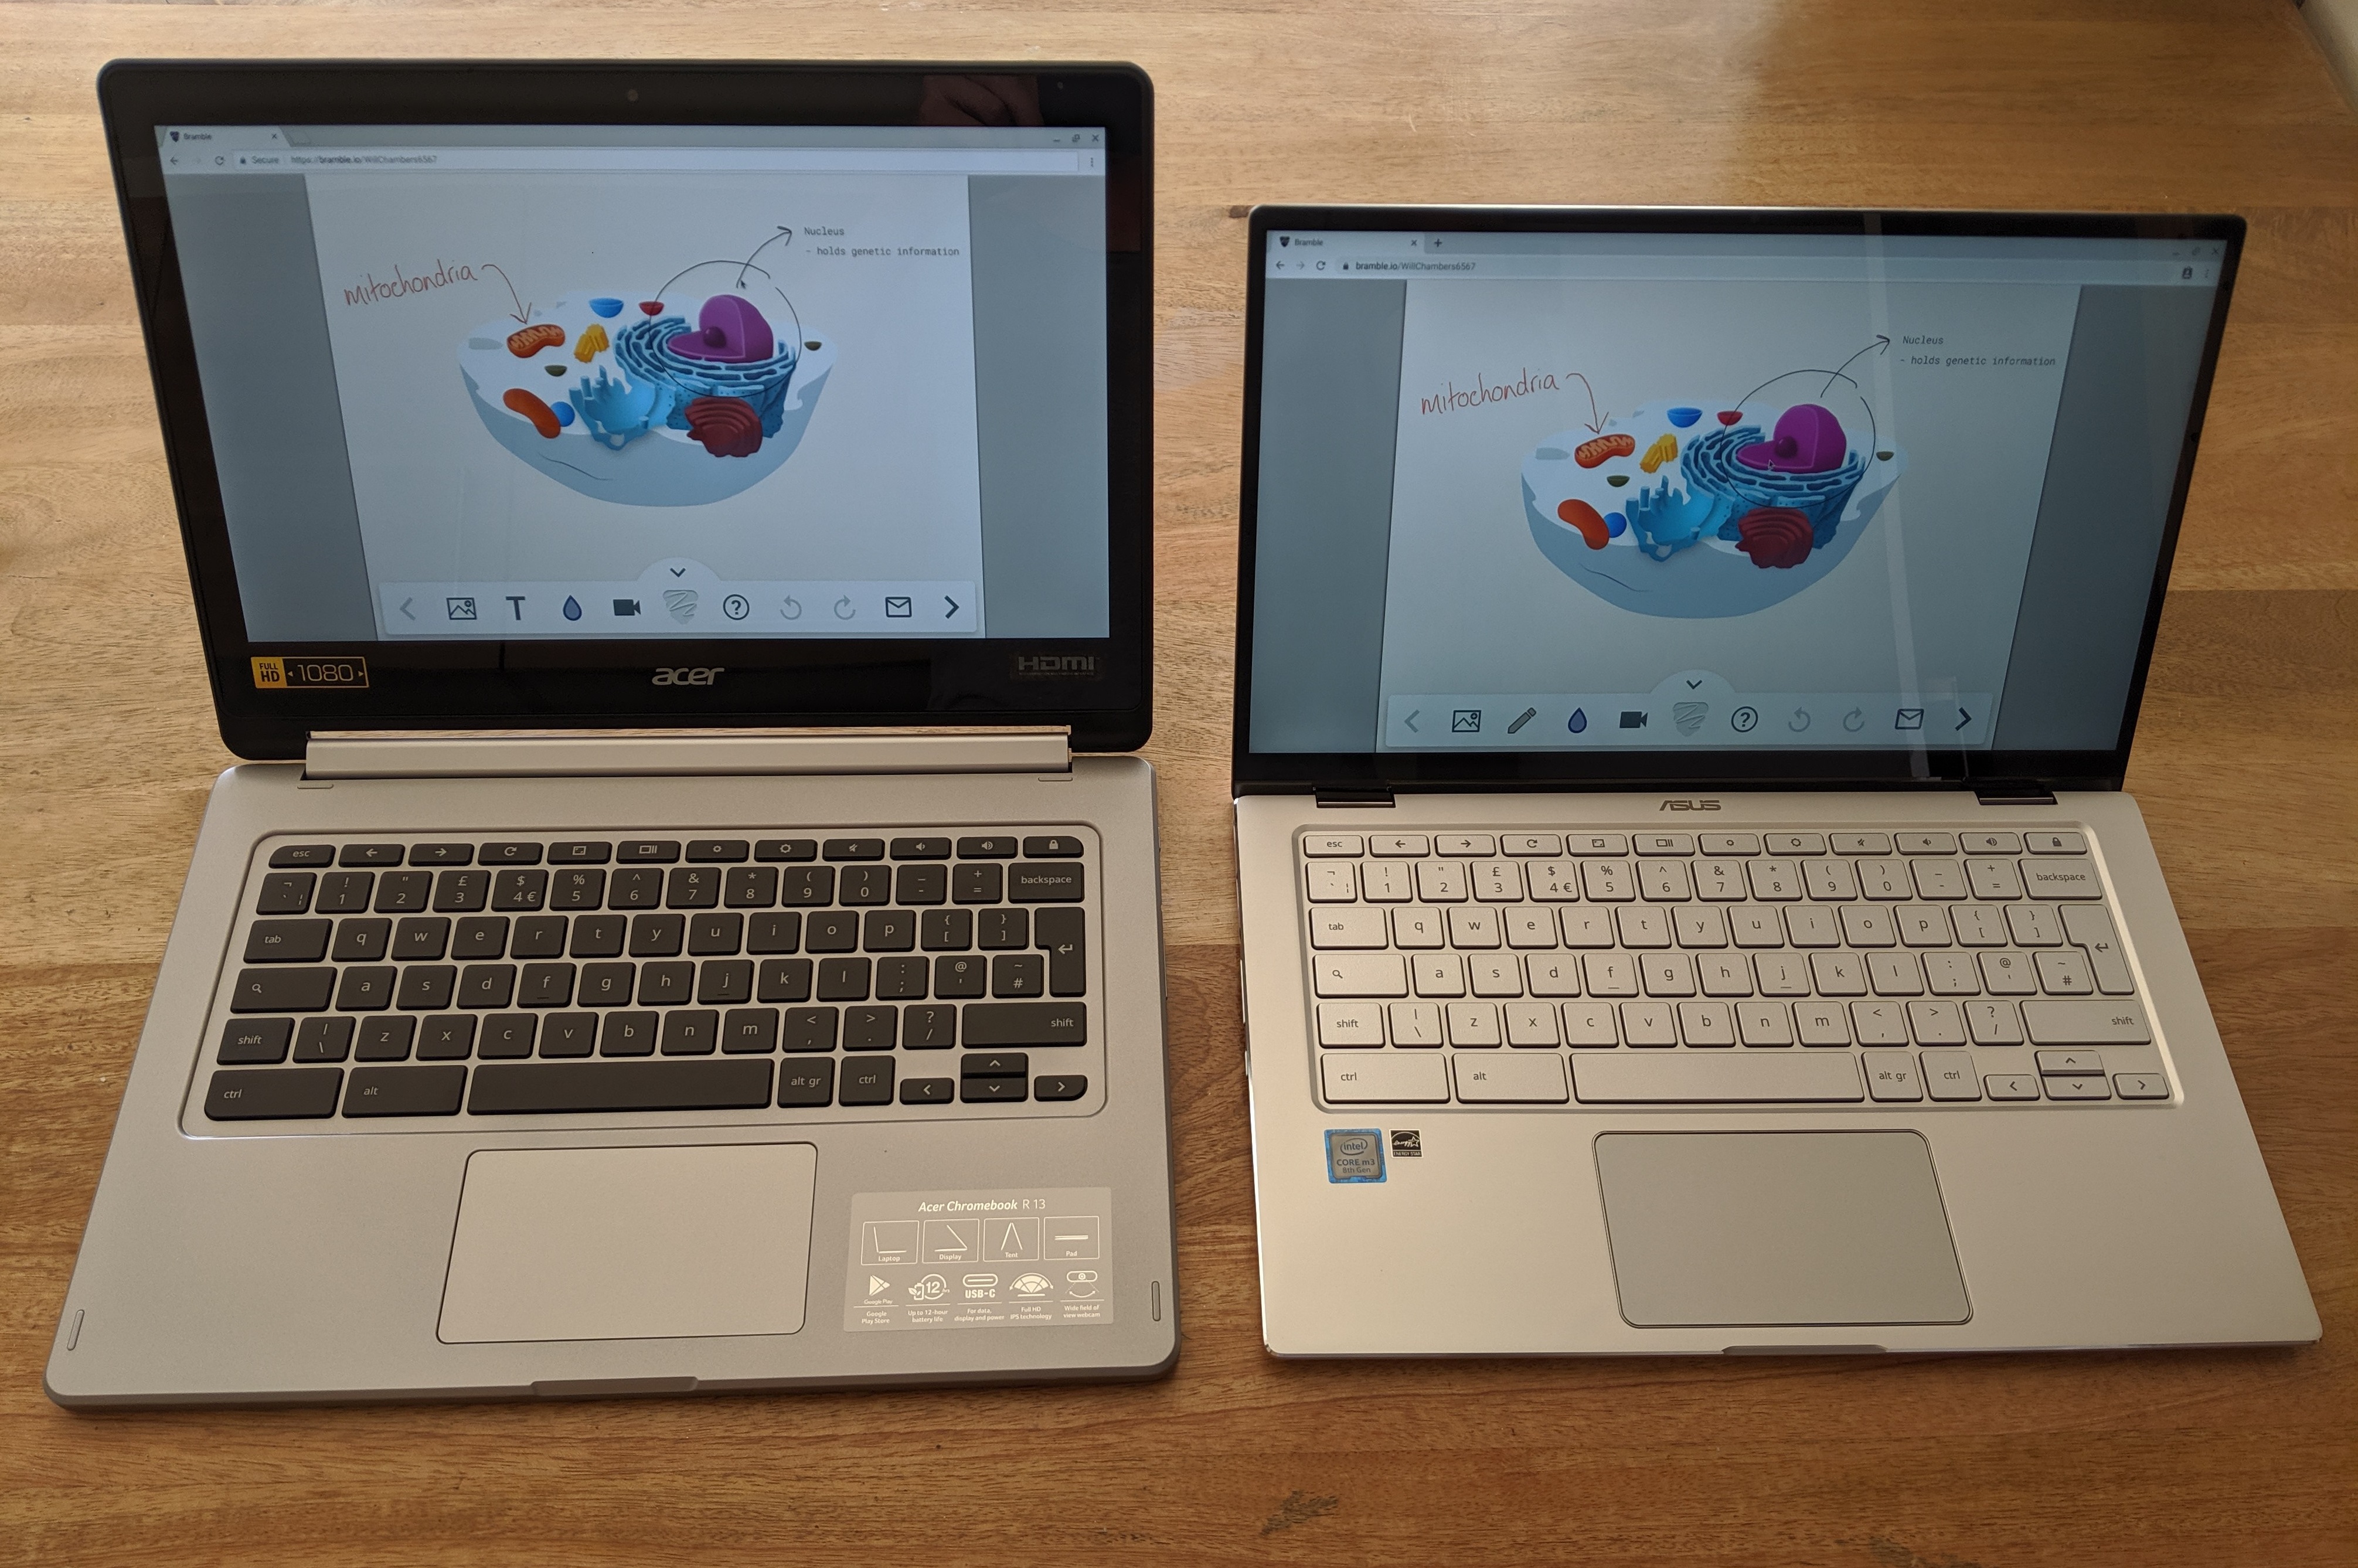 picture of the Chromebook 434 and the Chromebook cB5